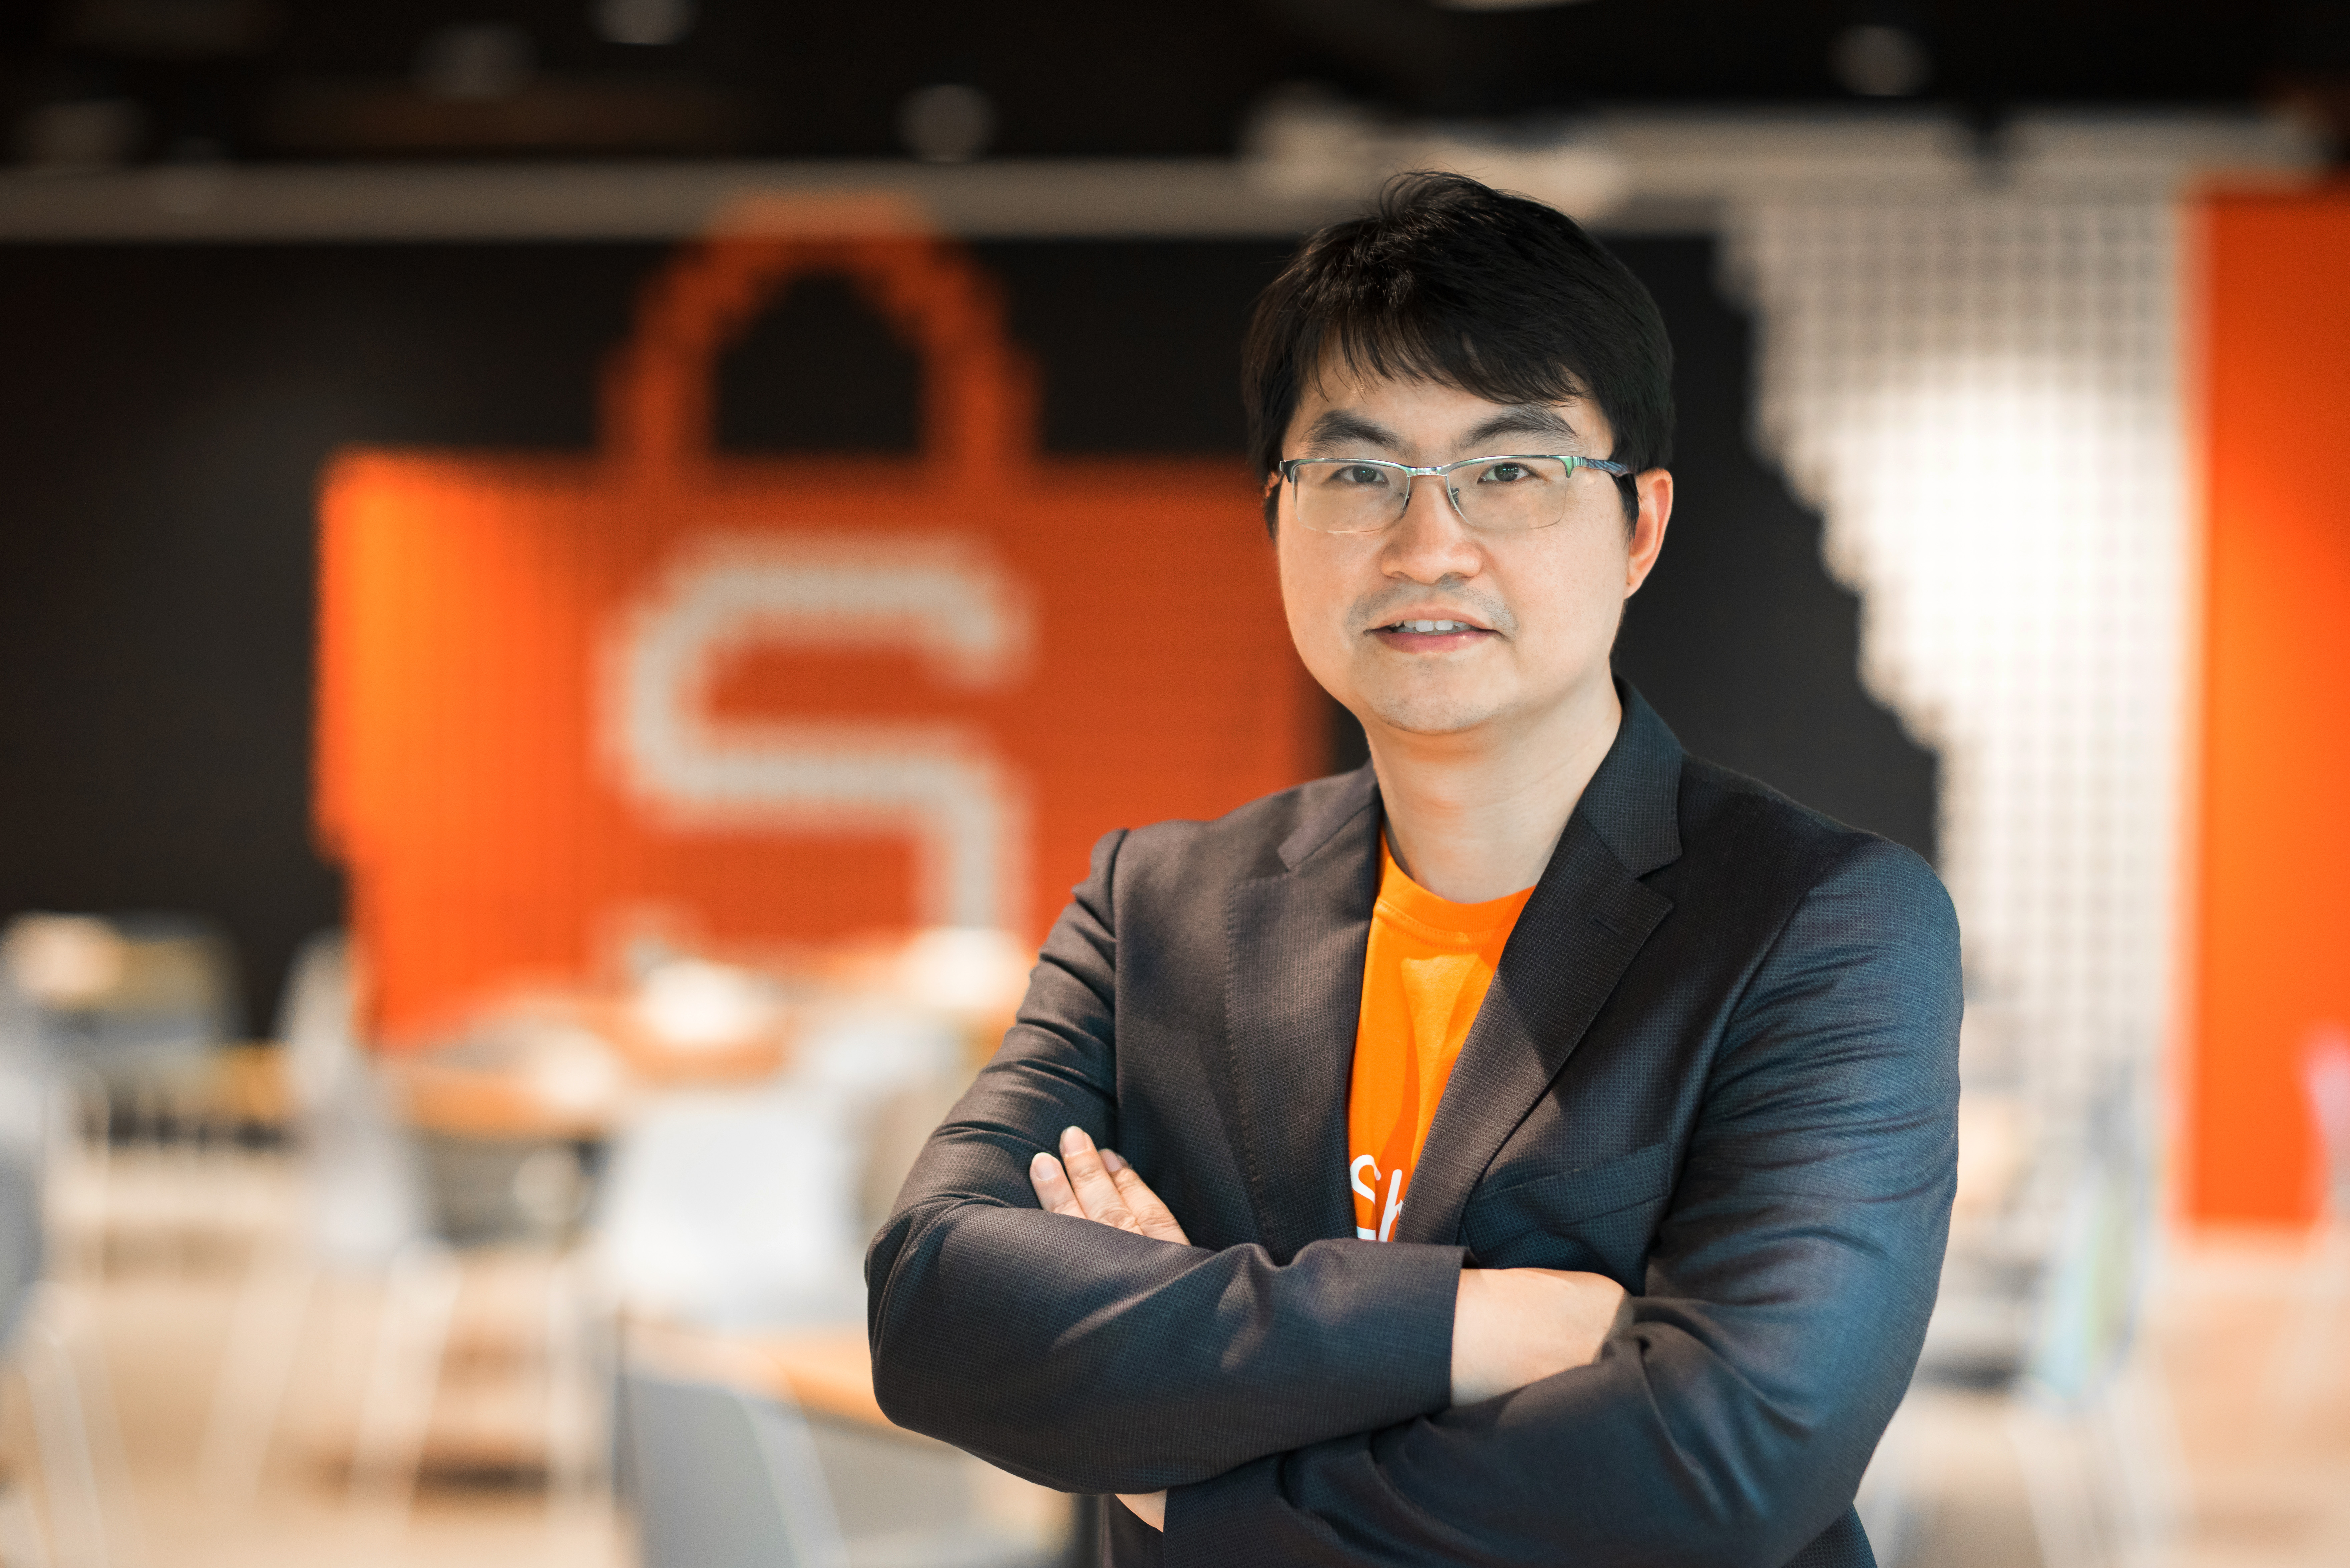 For Singapore’s Shopee, being ‘late’ to the e-commerce game has helped its rise in Southeast Asia